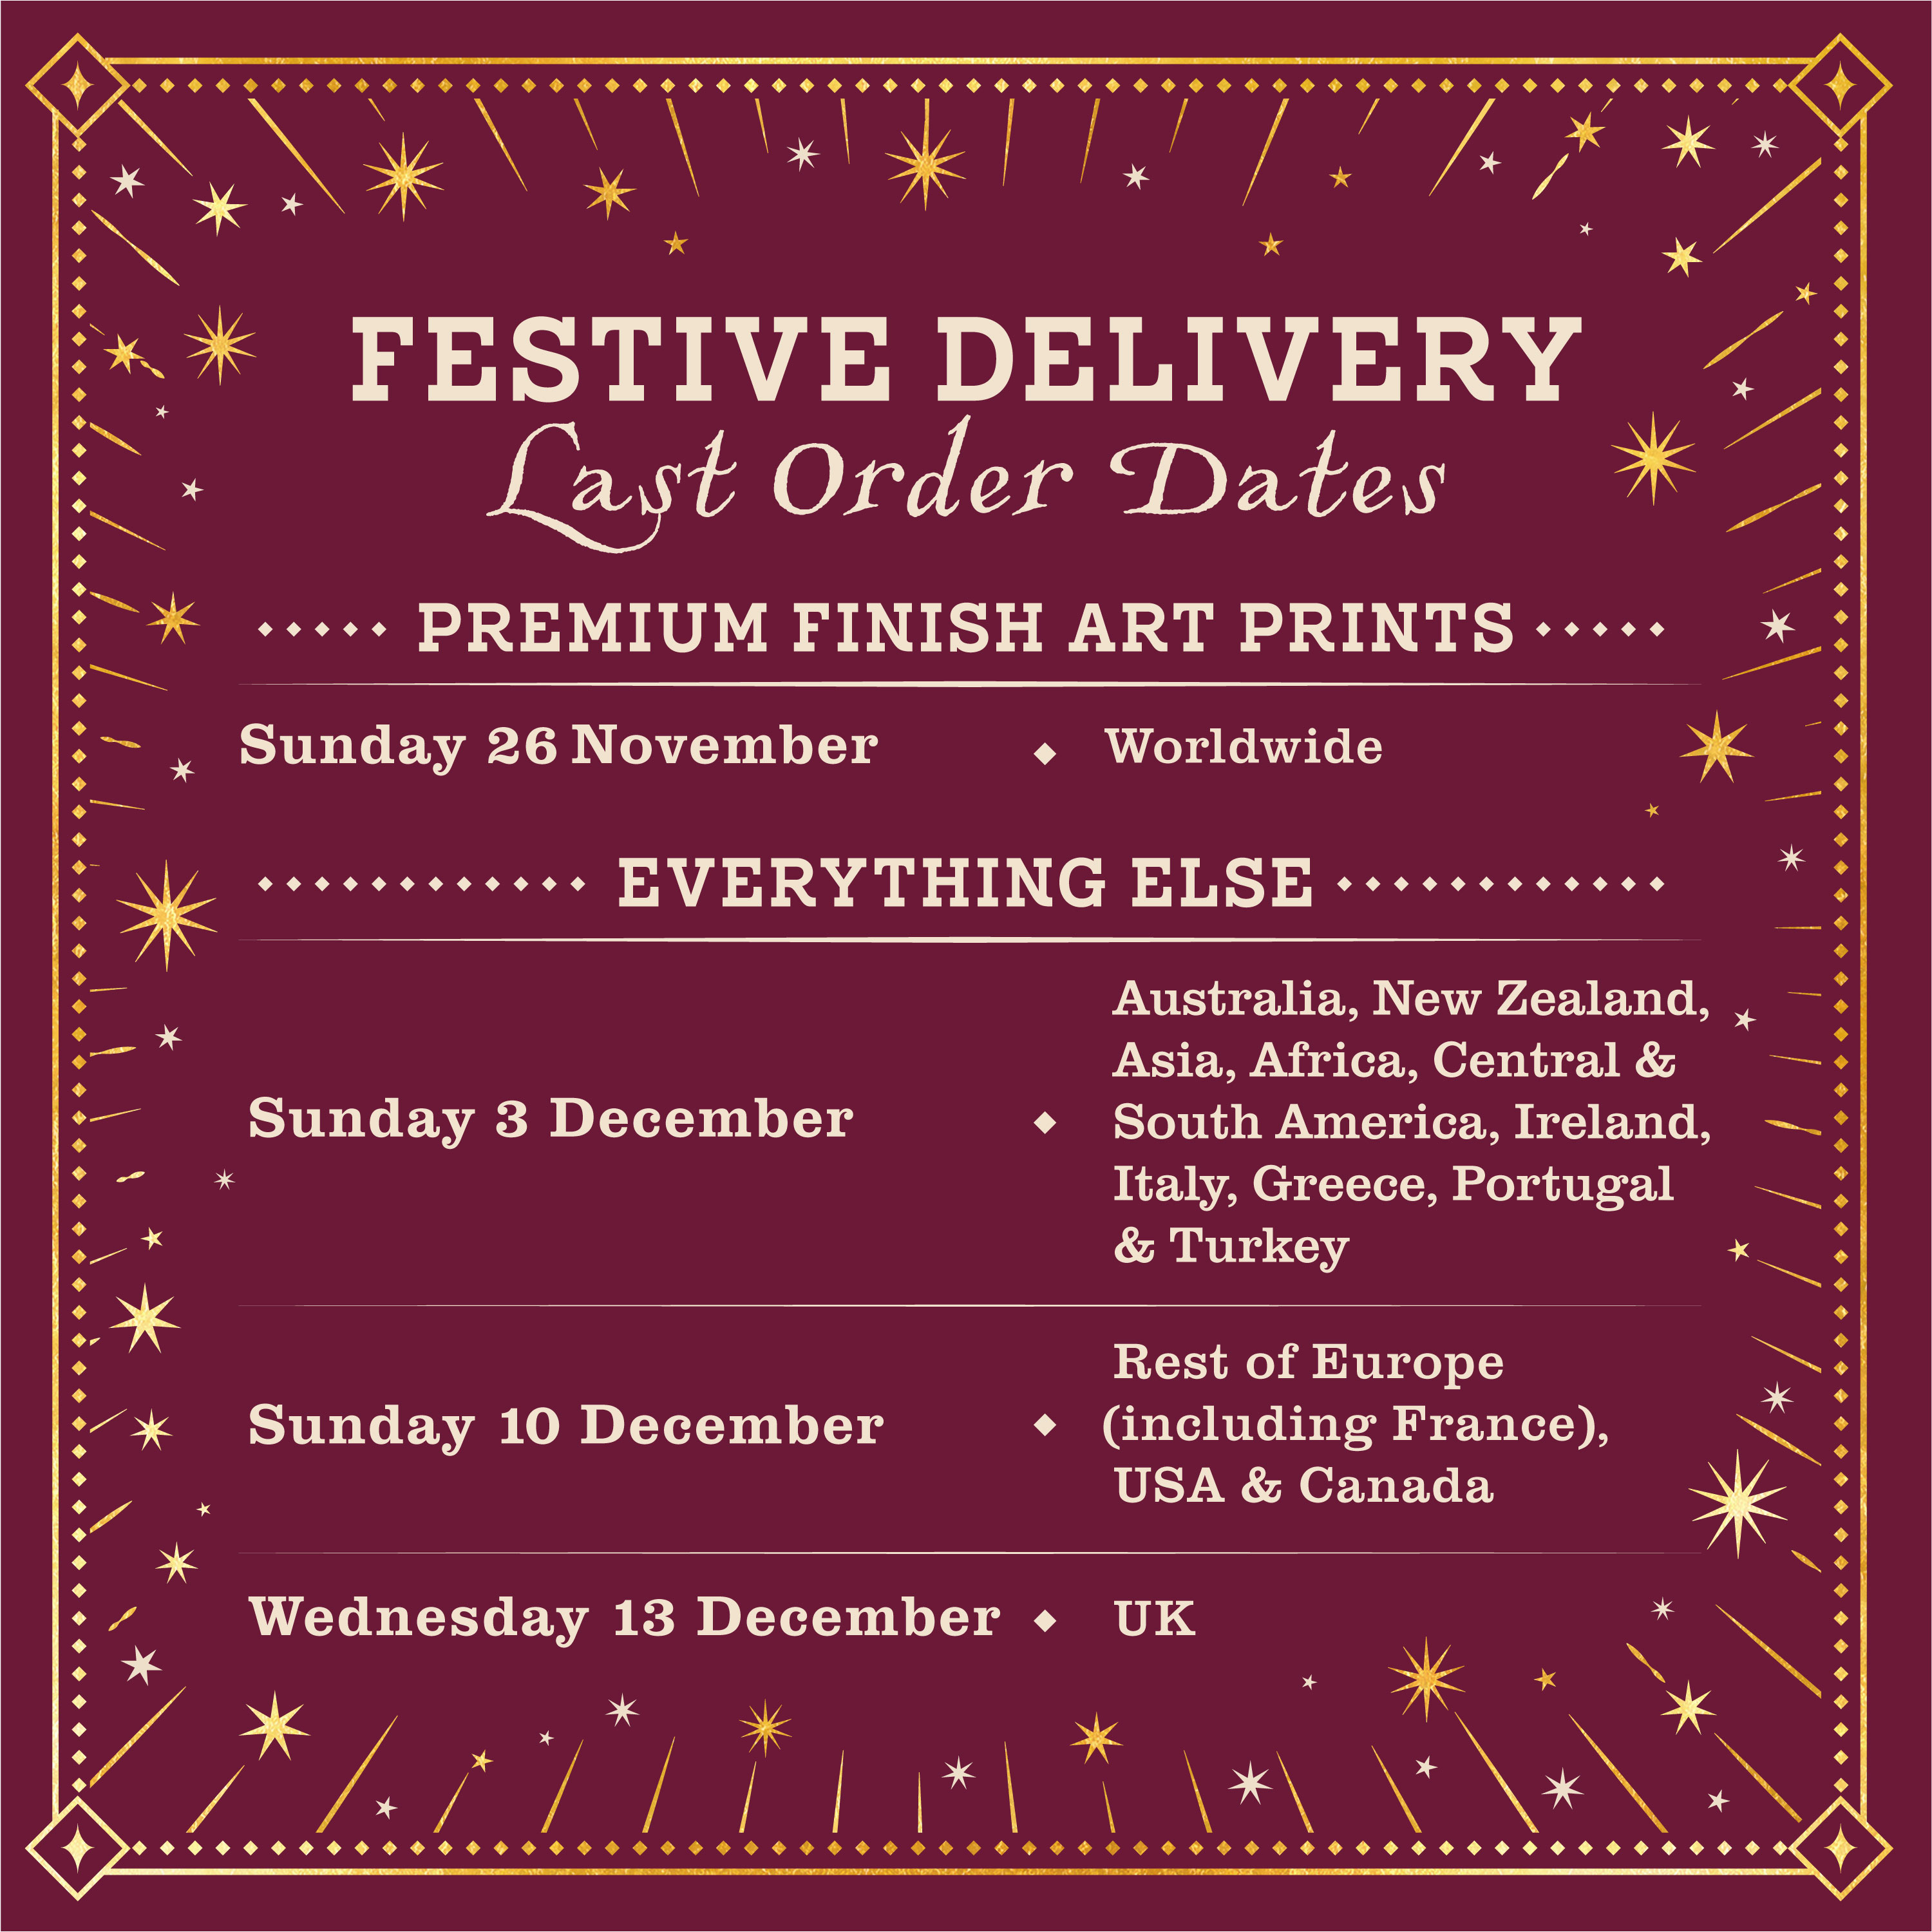 Festive Delivery - Last Order Dates